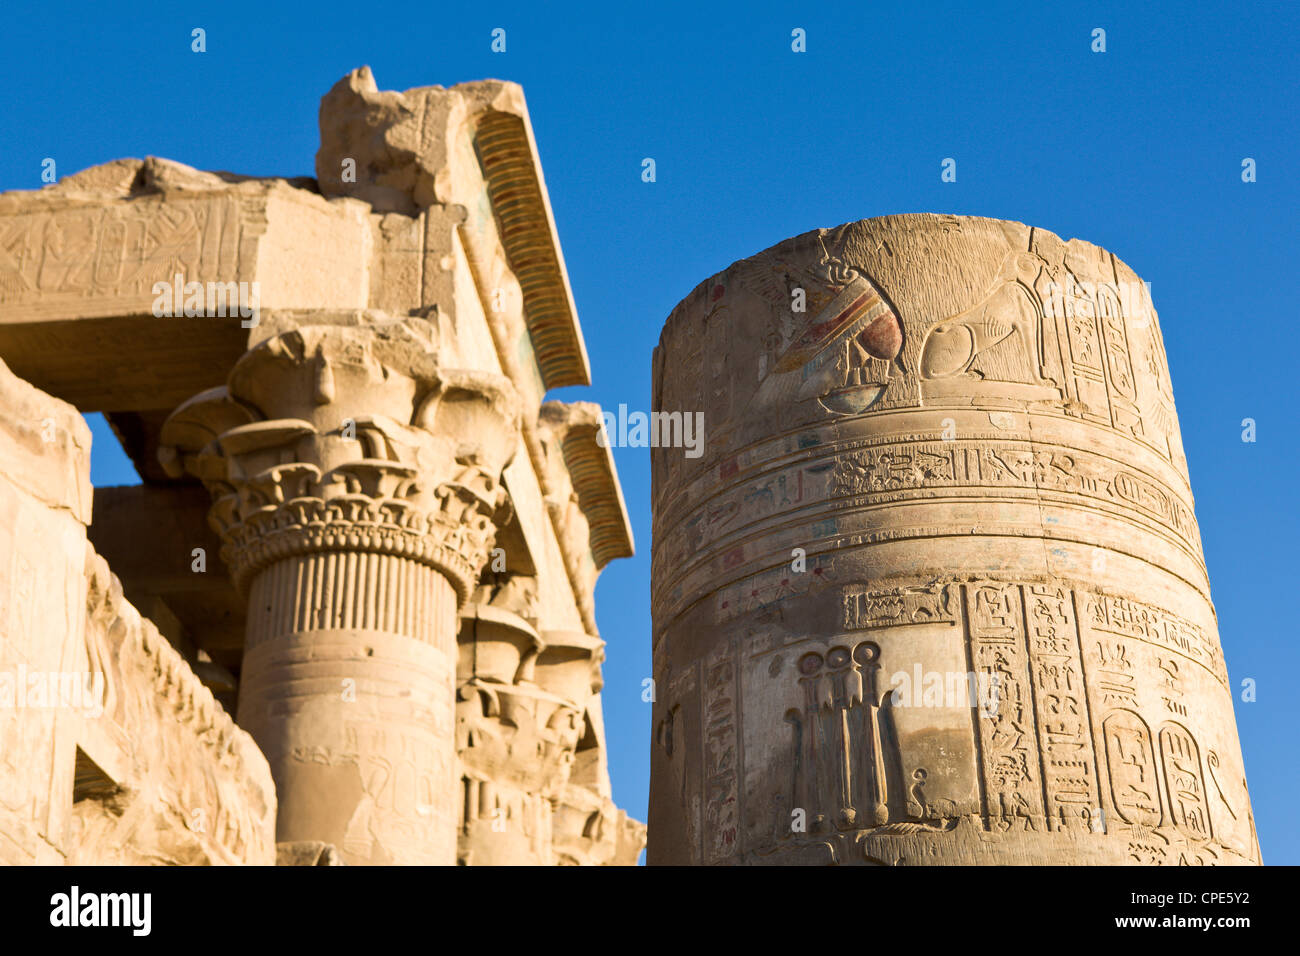 Painted pillar and Pronaos at the Temple of Sobek and Haroeris, Kom Ombo, Egypt, North Africa, Africa Stock Photo